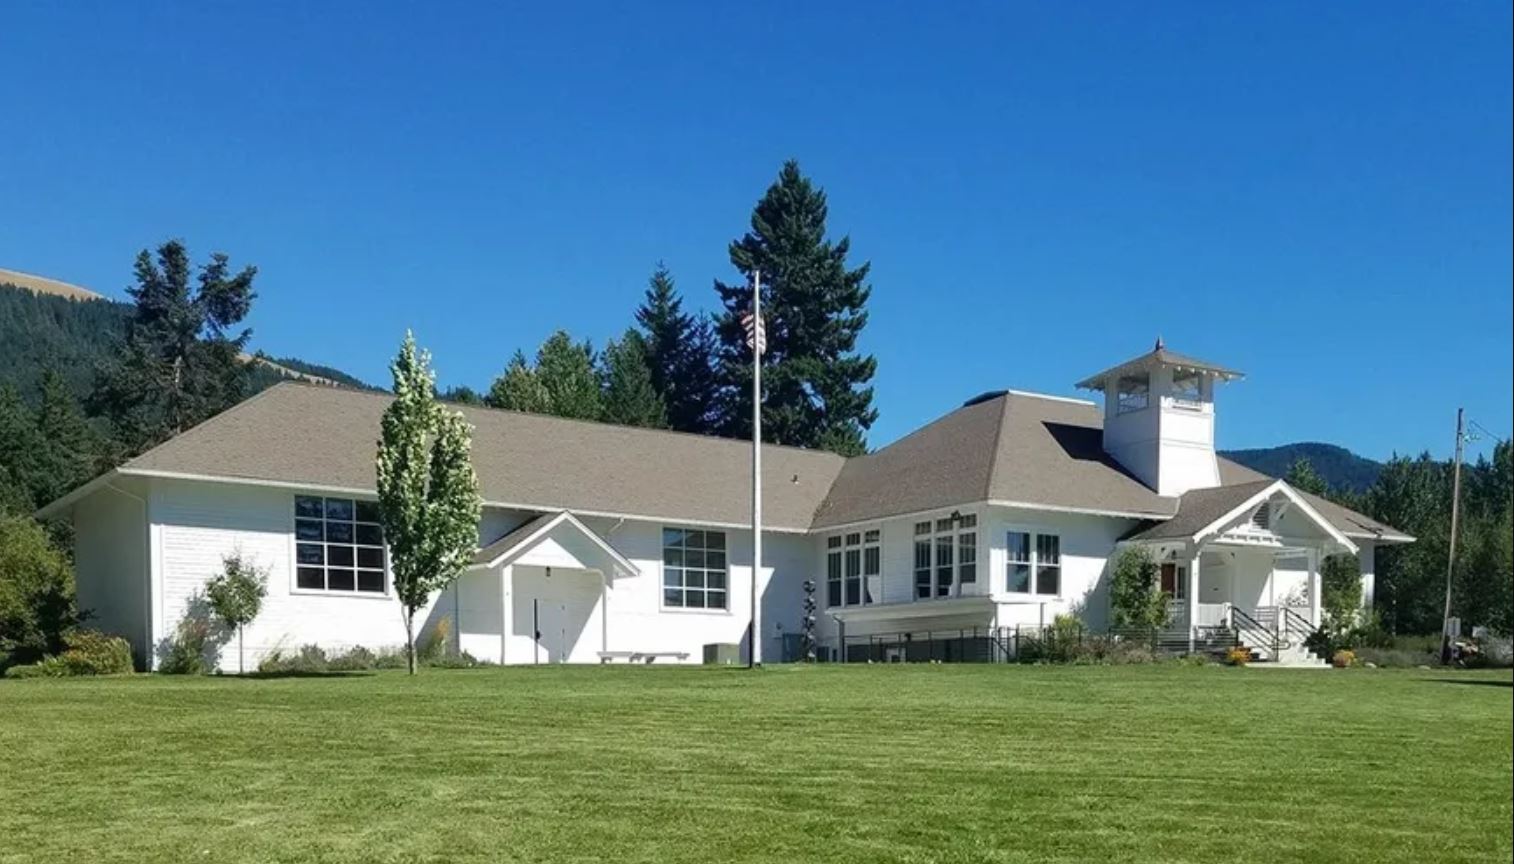 A vacant lot to hold events in Mt. Hood Town Hall